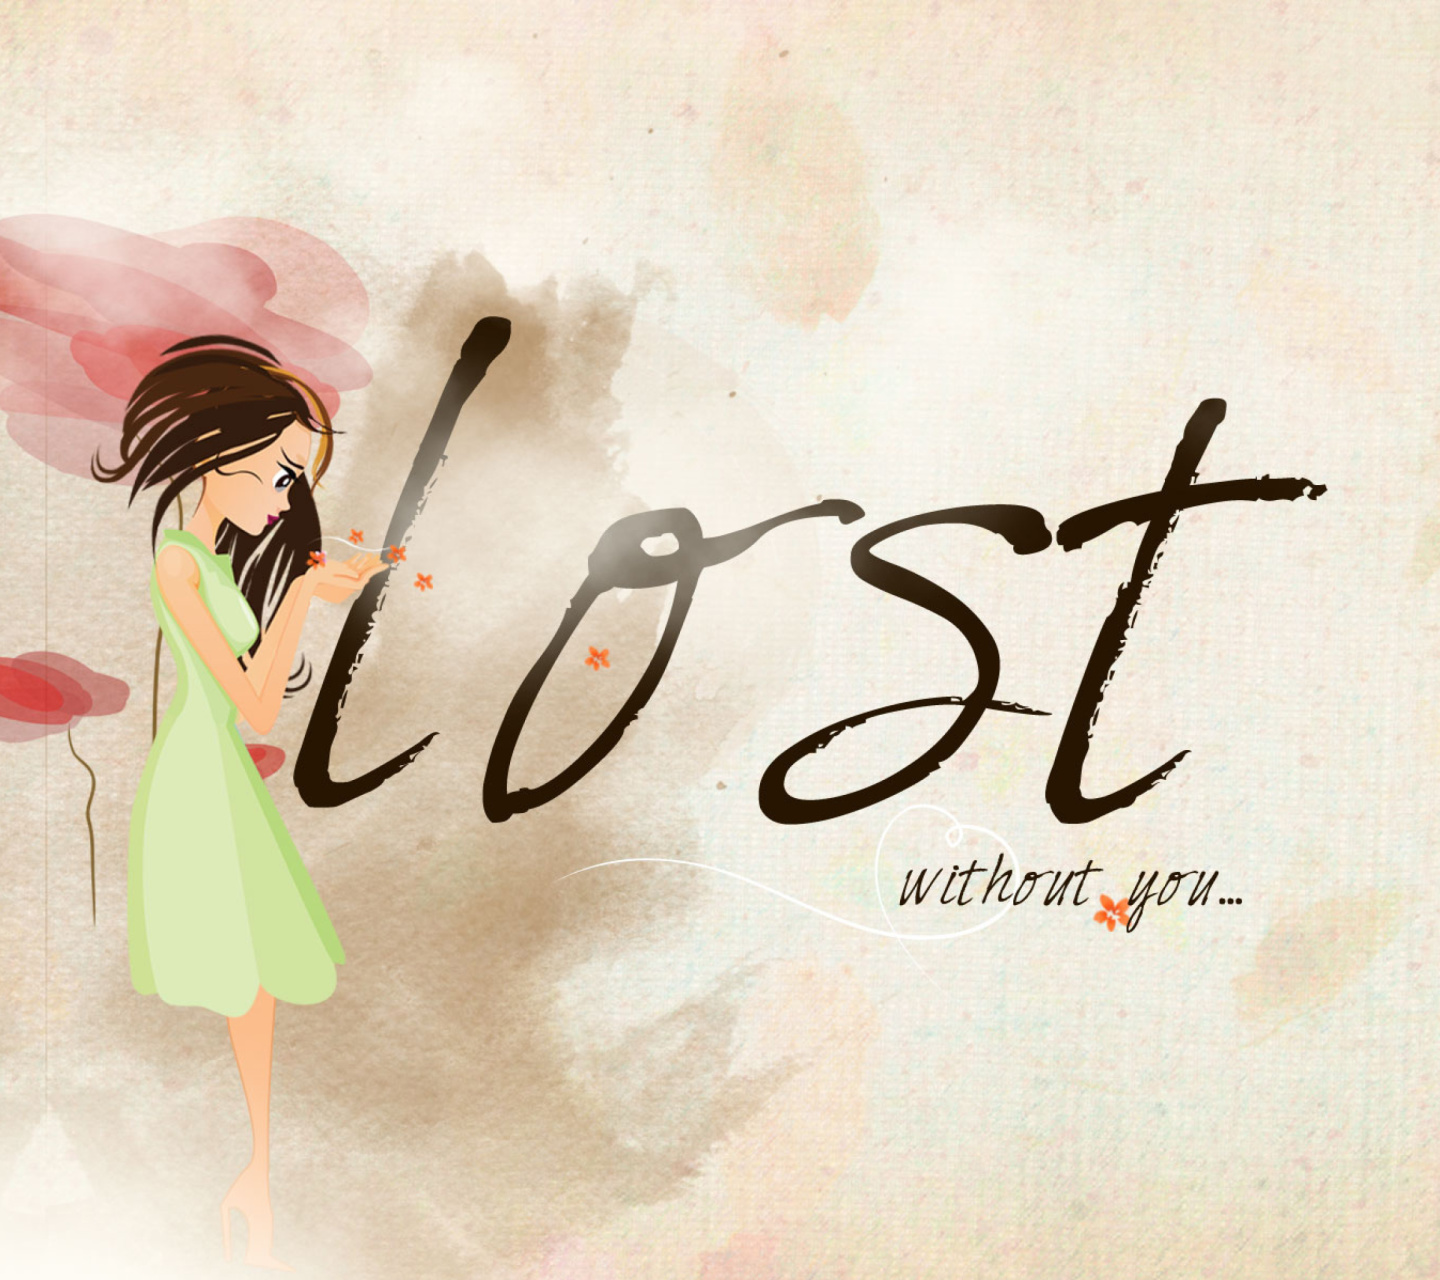 Lost Without You wallpaper 1440x1280